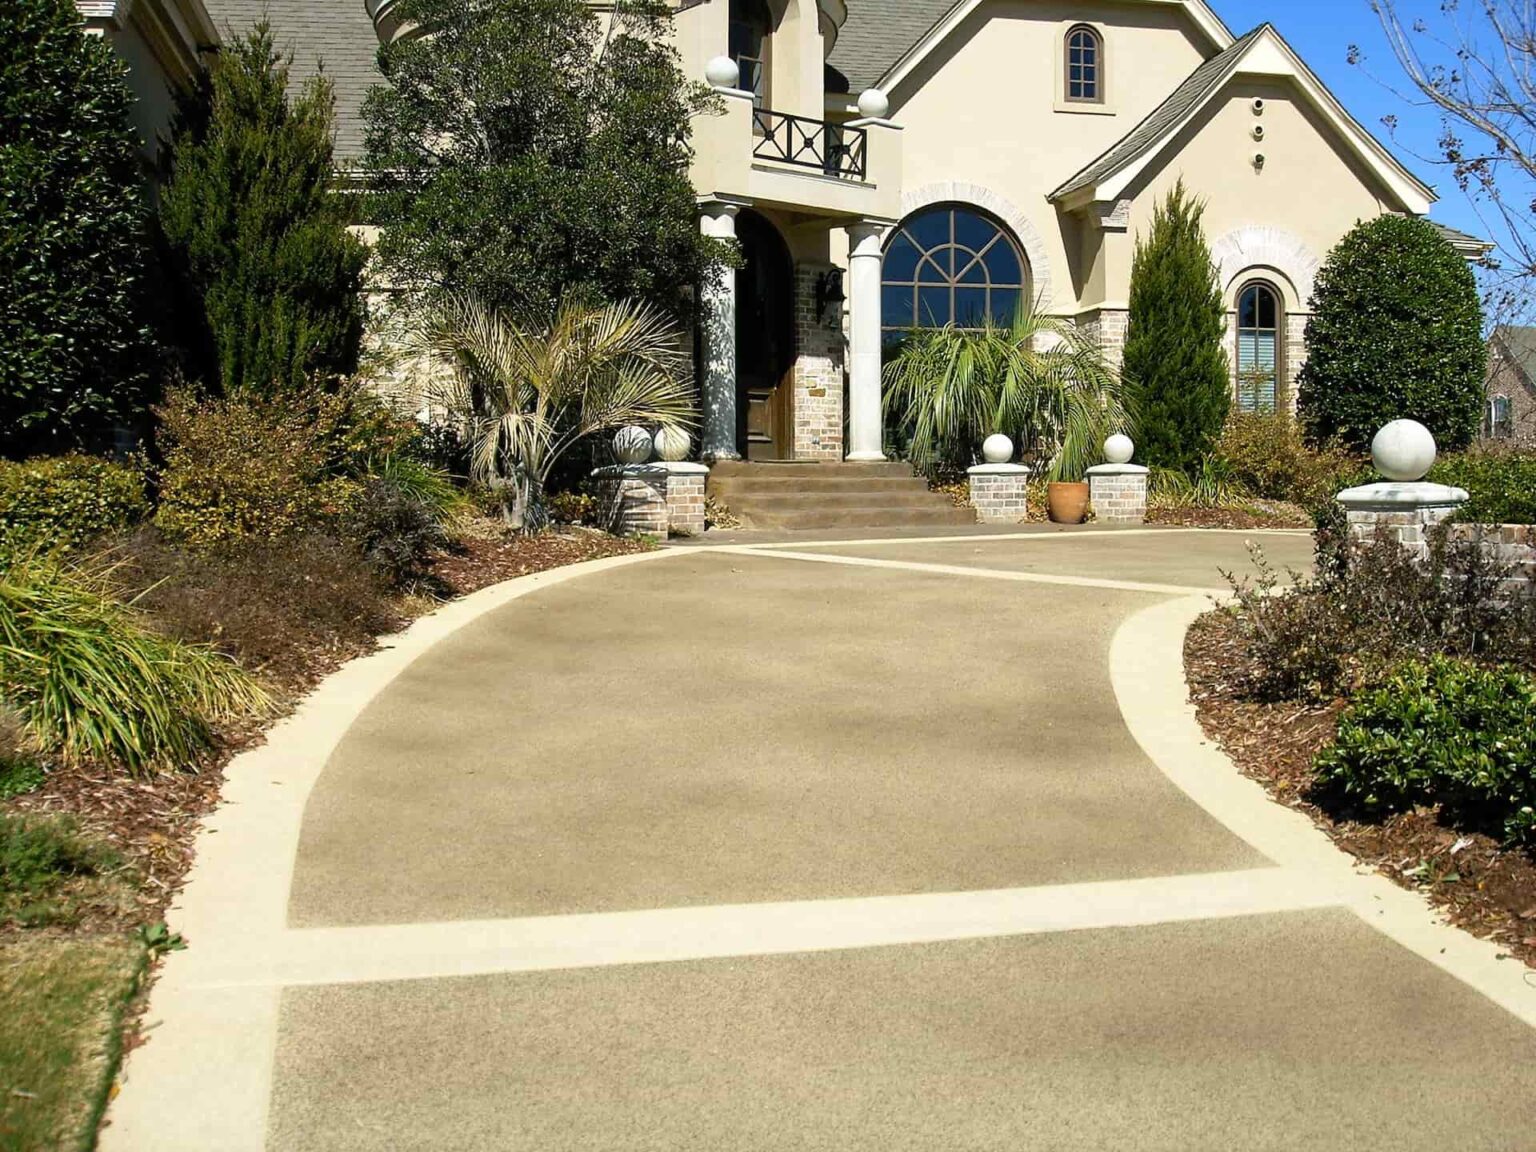 Discover the best tips to maintain your concrete driveways in the best possible conditions. Here's all you need to know.